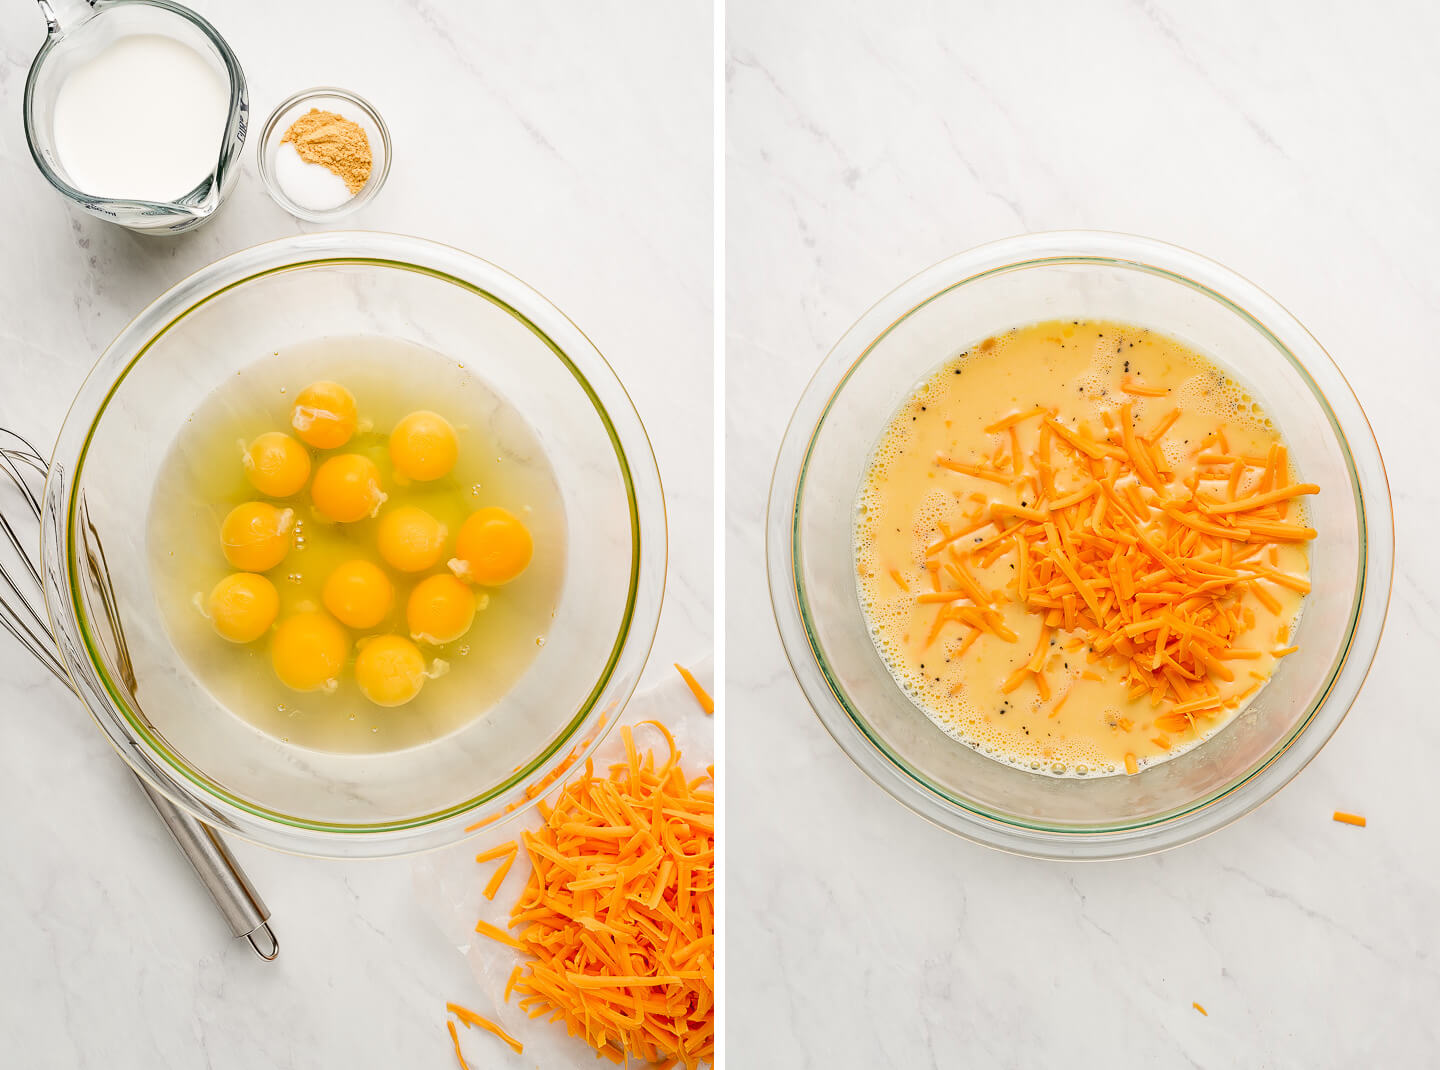 Diptych- Eggs in bowl with milk and cheese to side; all mixed together.